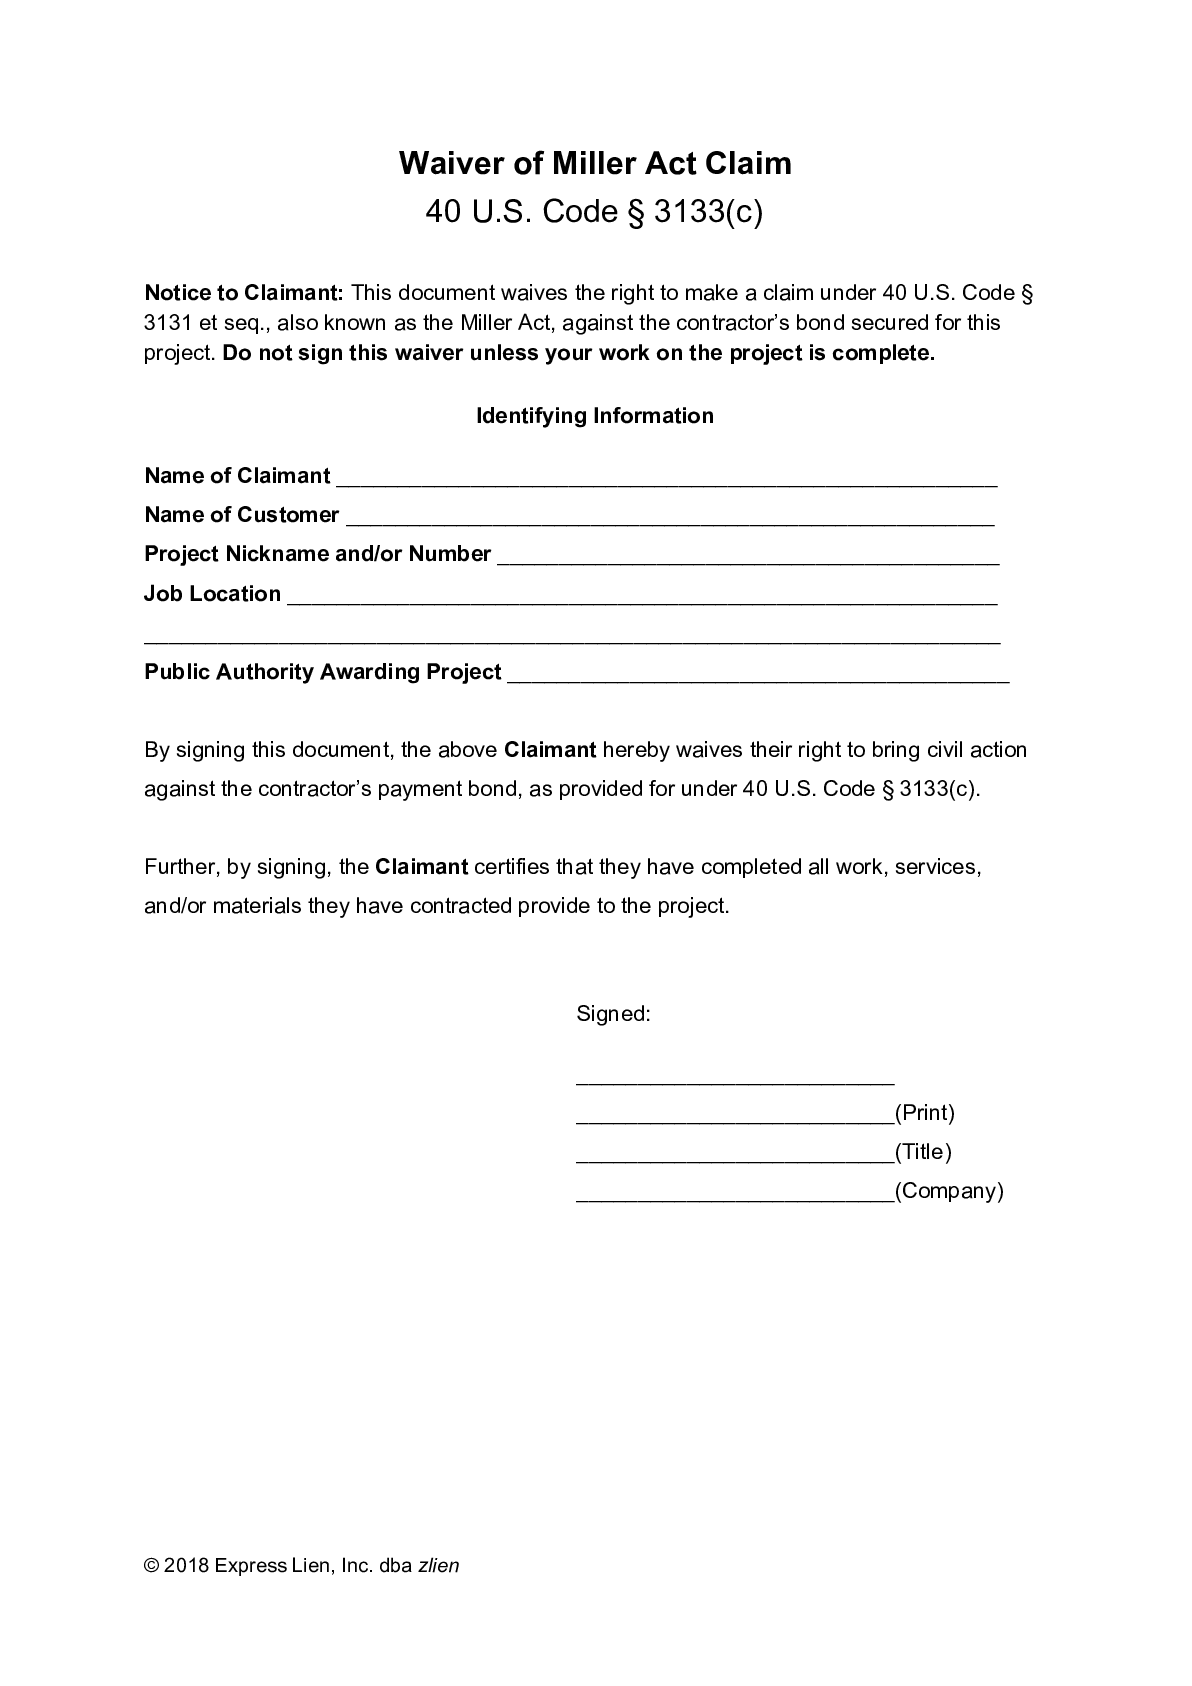 Waiver of Miller Act Claim Form